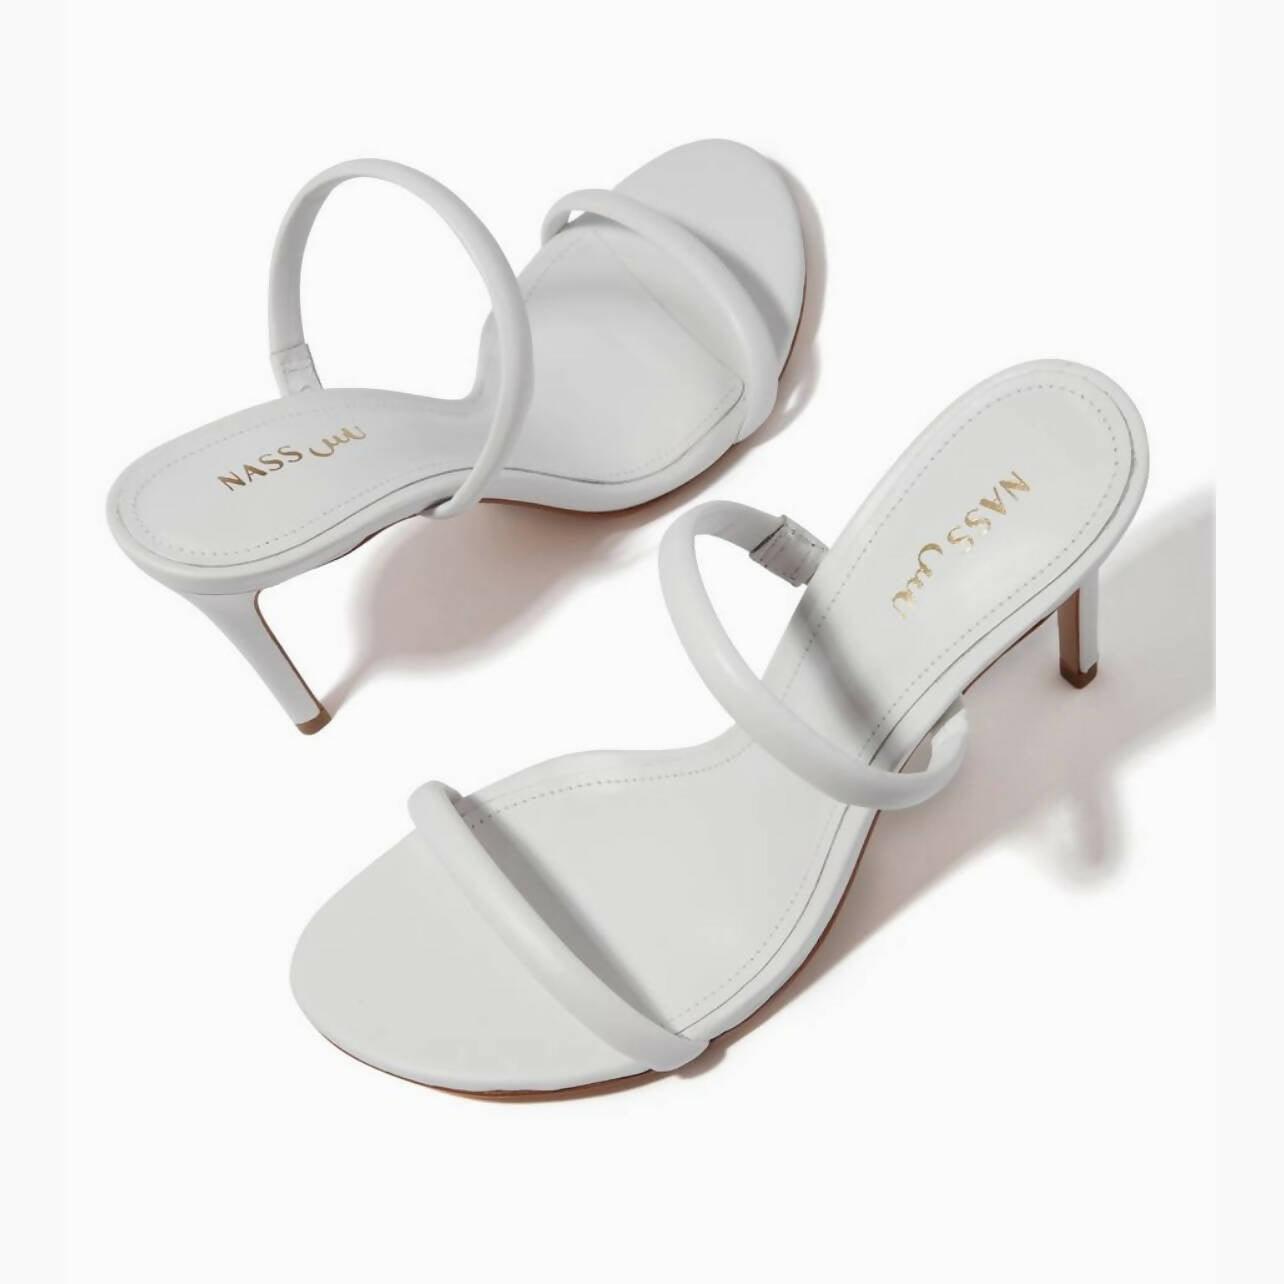 Leather Mule Strap Sandals - Endless